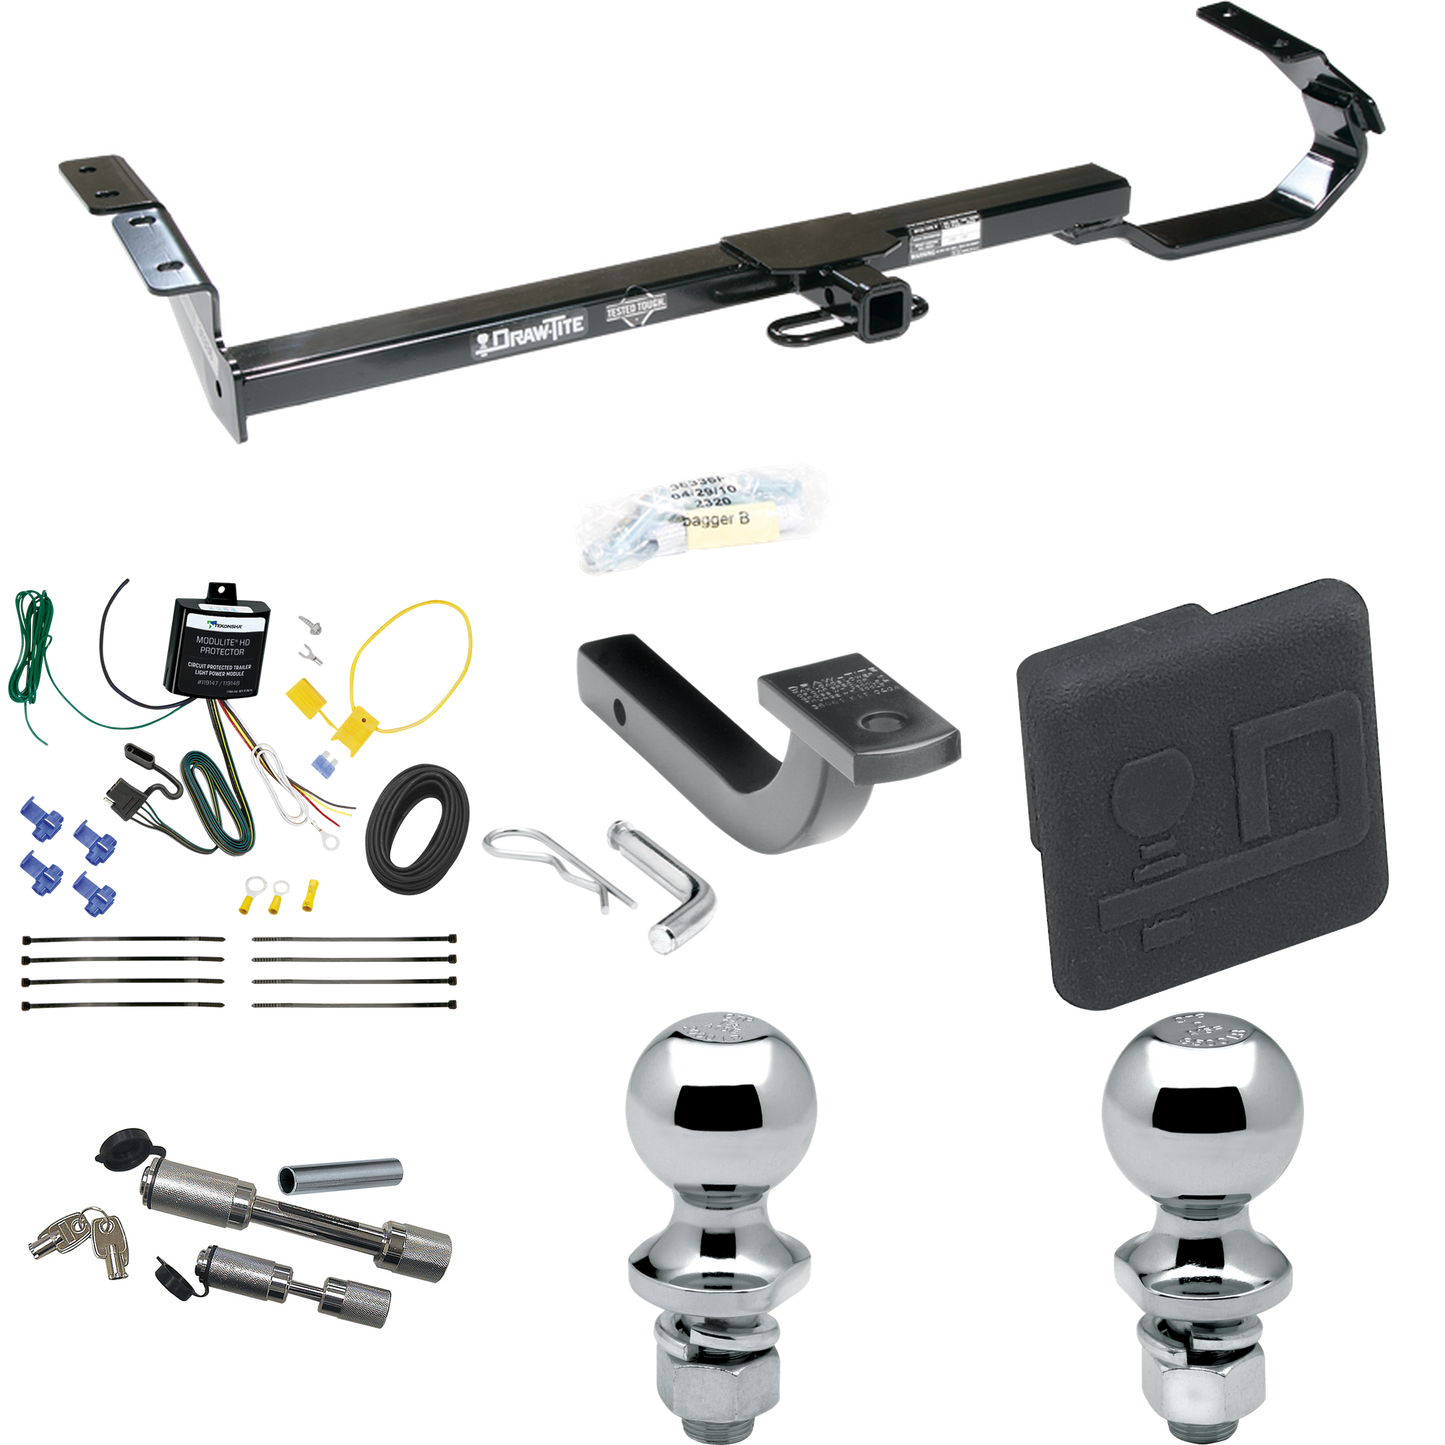 Fits 1992-1996 Toyota Camry Trailer Hitch Tow PKG w/ 4-Flat Wiring Harness + Draw-Bar + 1-7/8" + 2" Ball + Hitch Cover + Dual Hitch & Coupler Locks By Draw-Tite